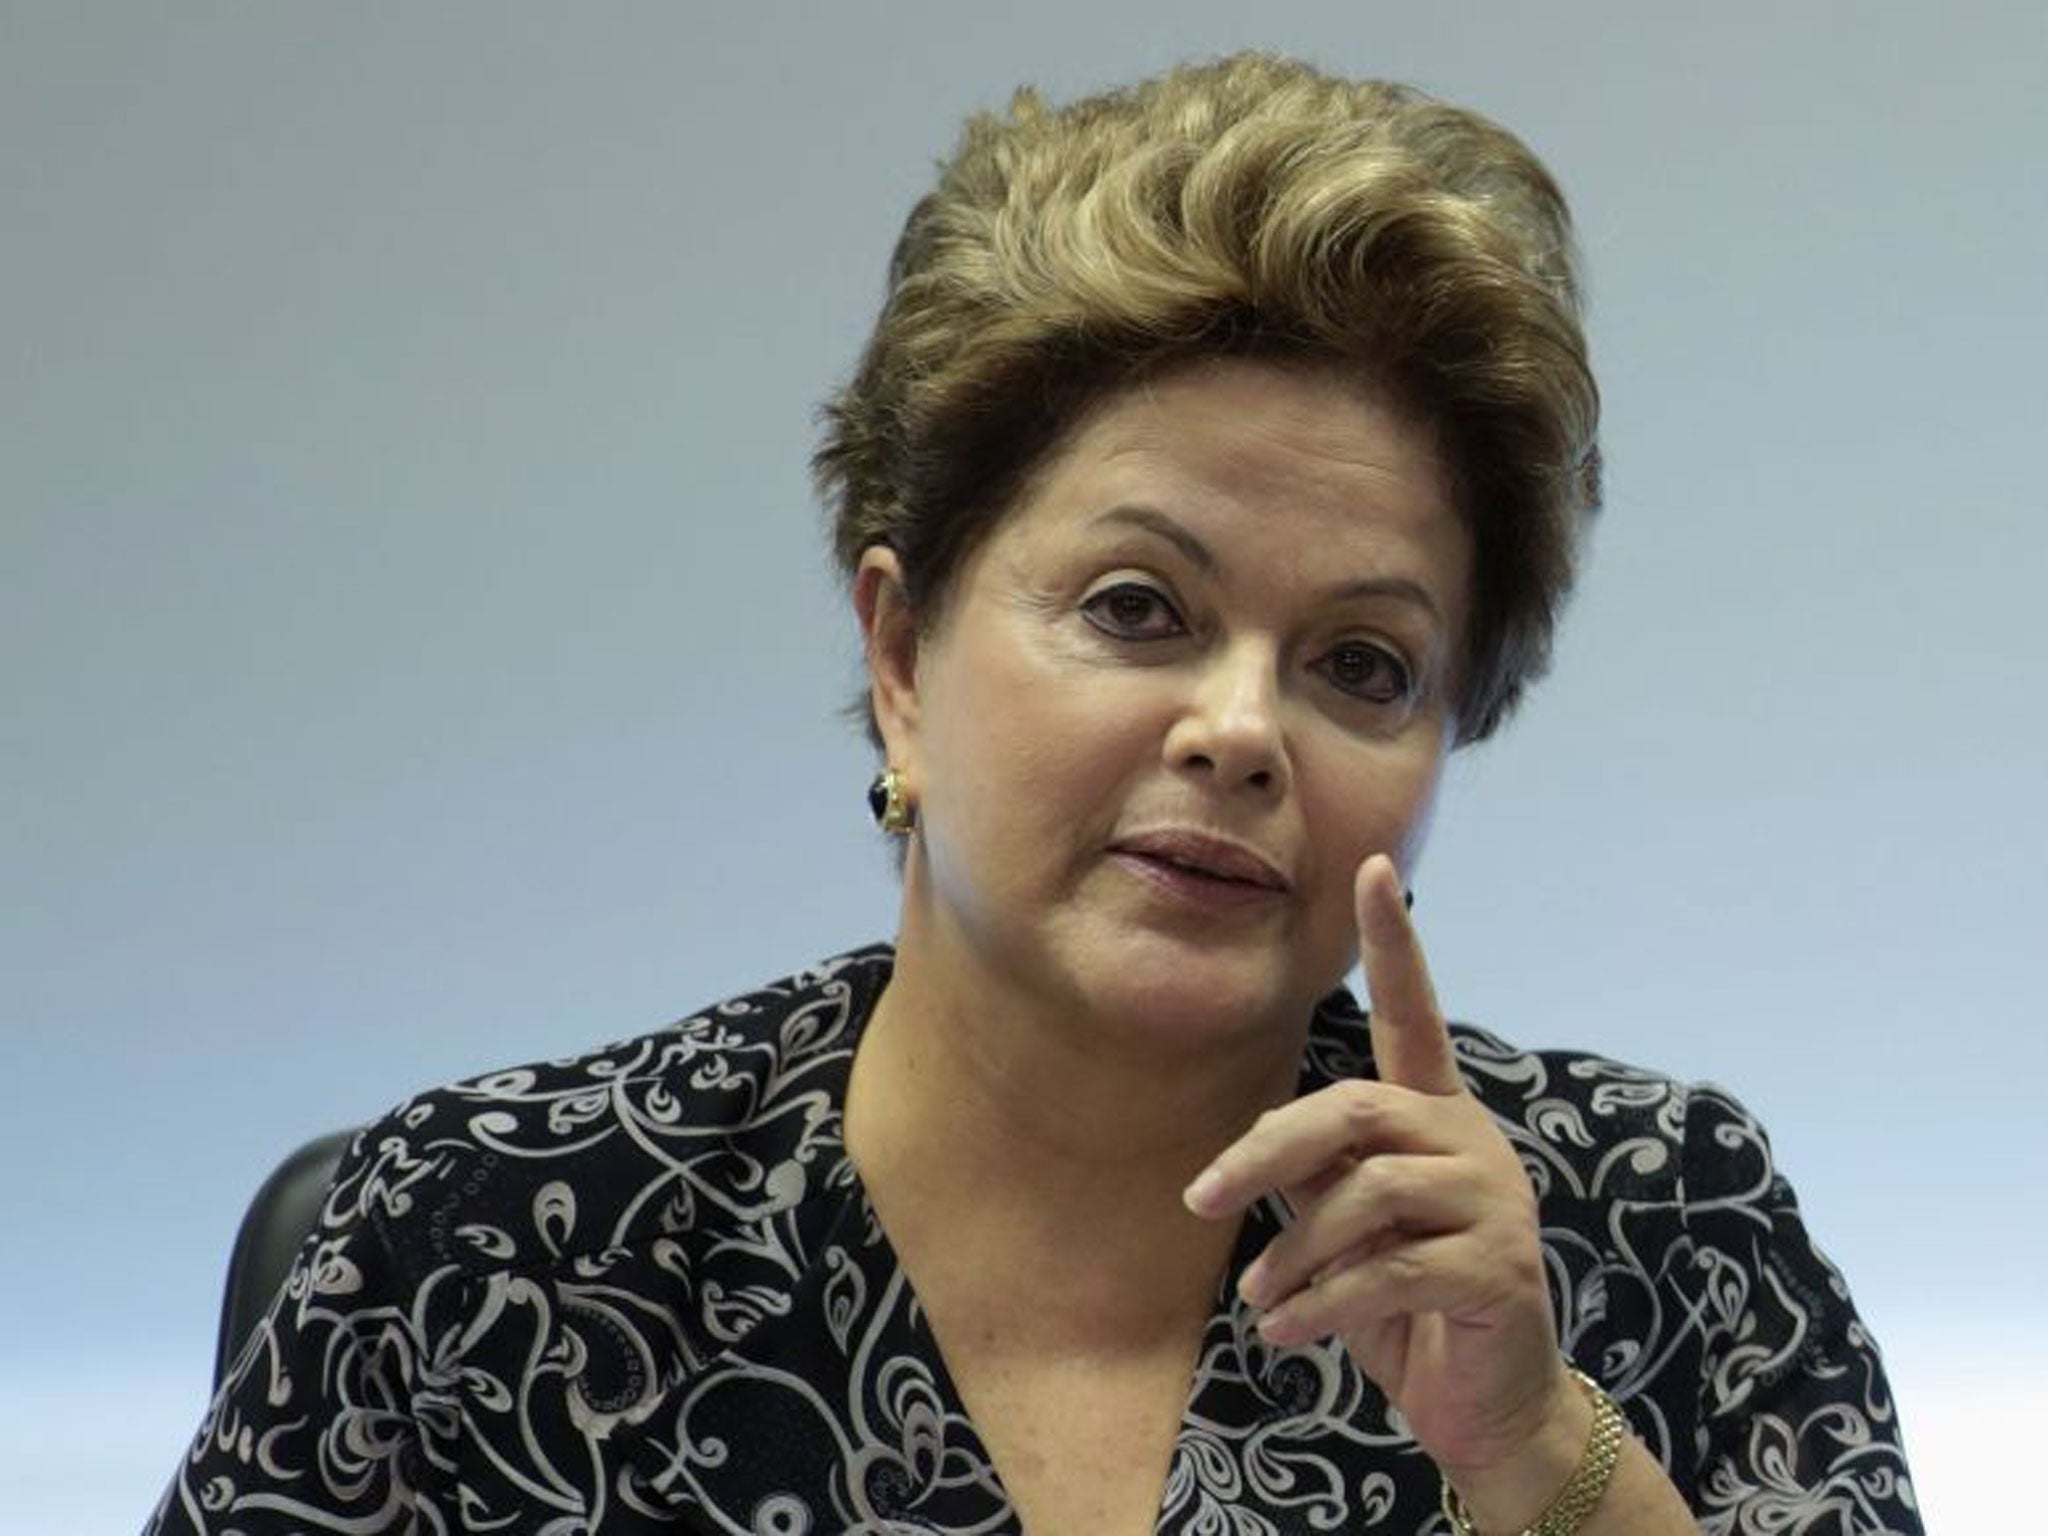 Brazil's President Dilma Rousseff gestures during a meeting with representatives from youth movement groups at the Planalto Palace